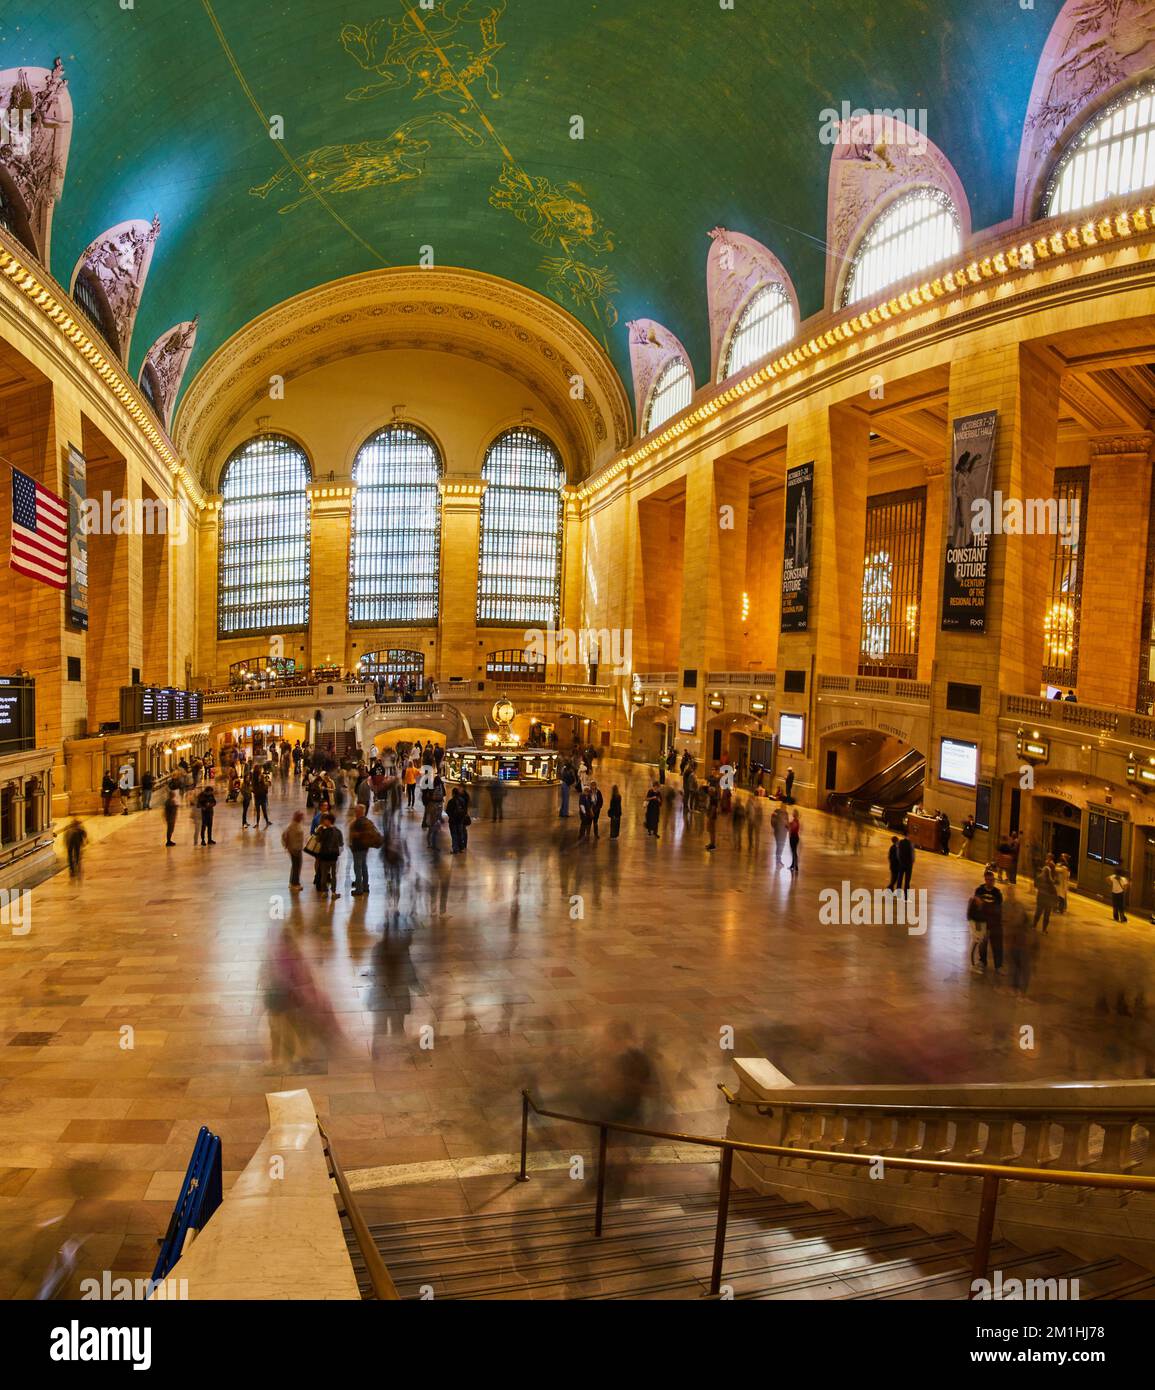 People fill iconic Grand Central Station wide panorama by stairs in New York City Stock Photo